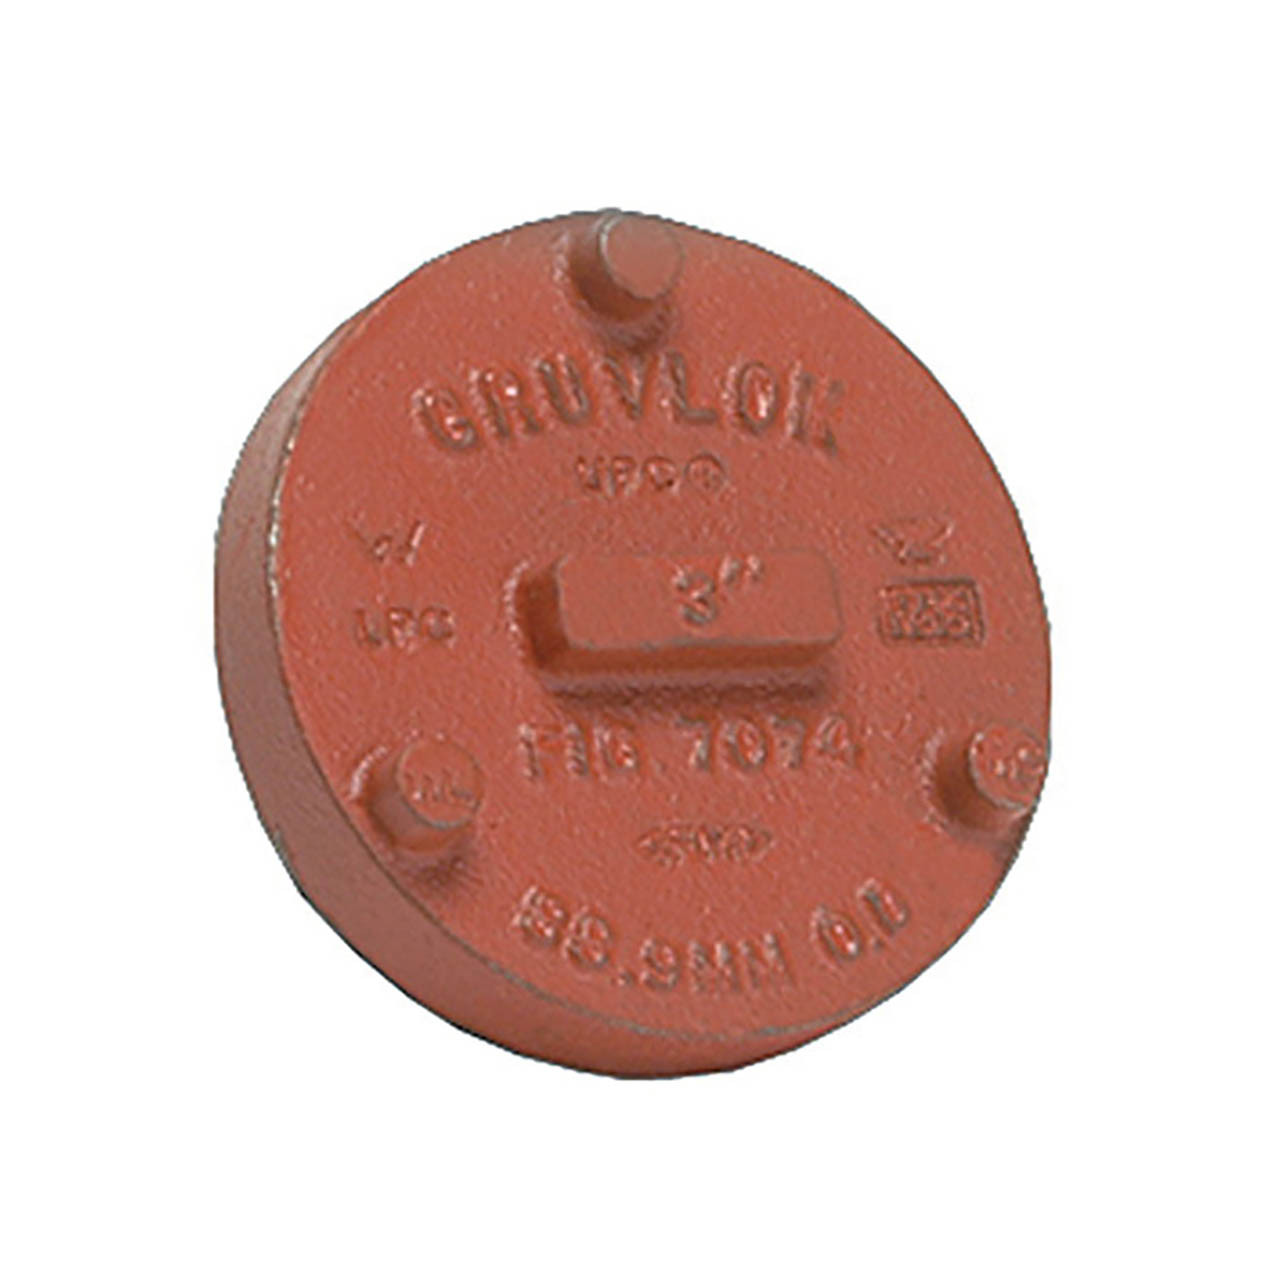 Anvil FIG 7074 Gruvlok® Ductile Iron 8 in. Pipe Cap Fitting, Grooved End,  Ptd. Orange